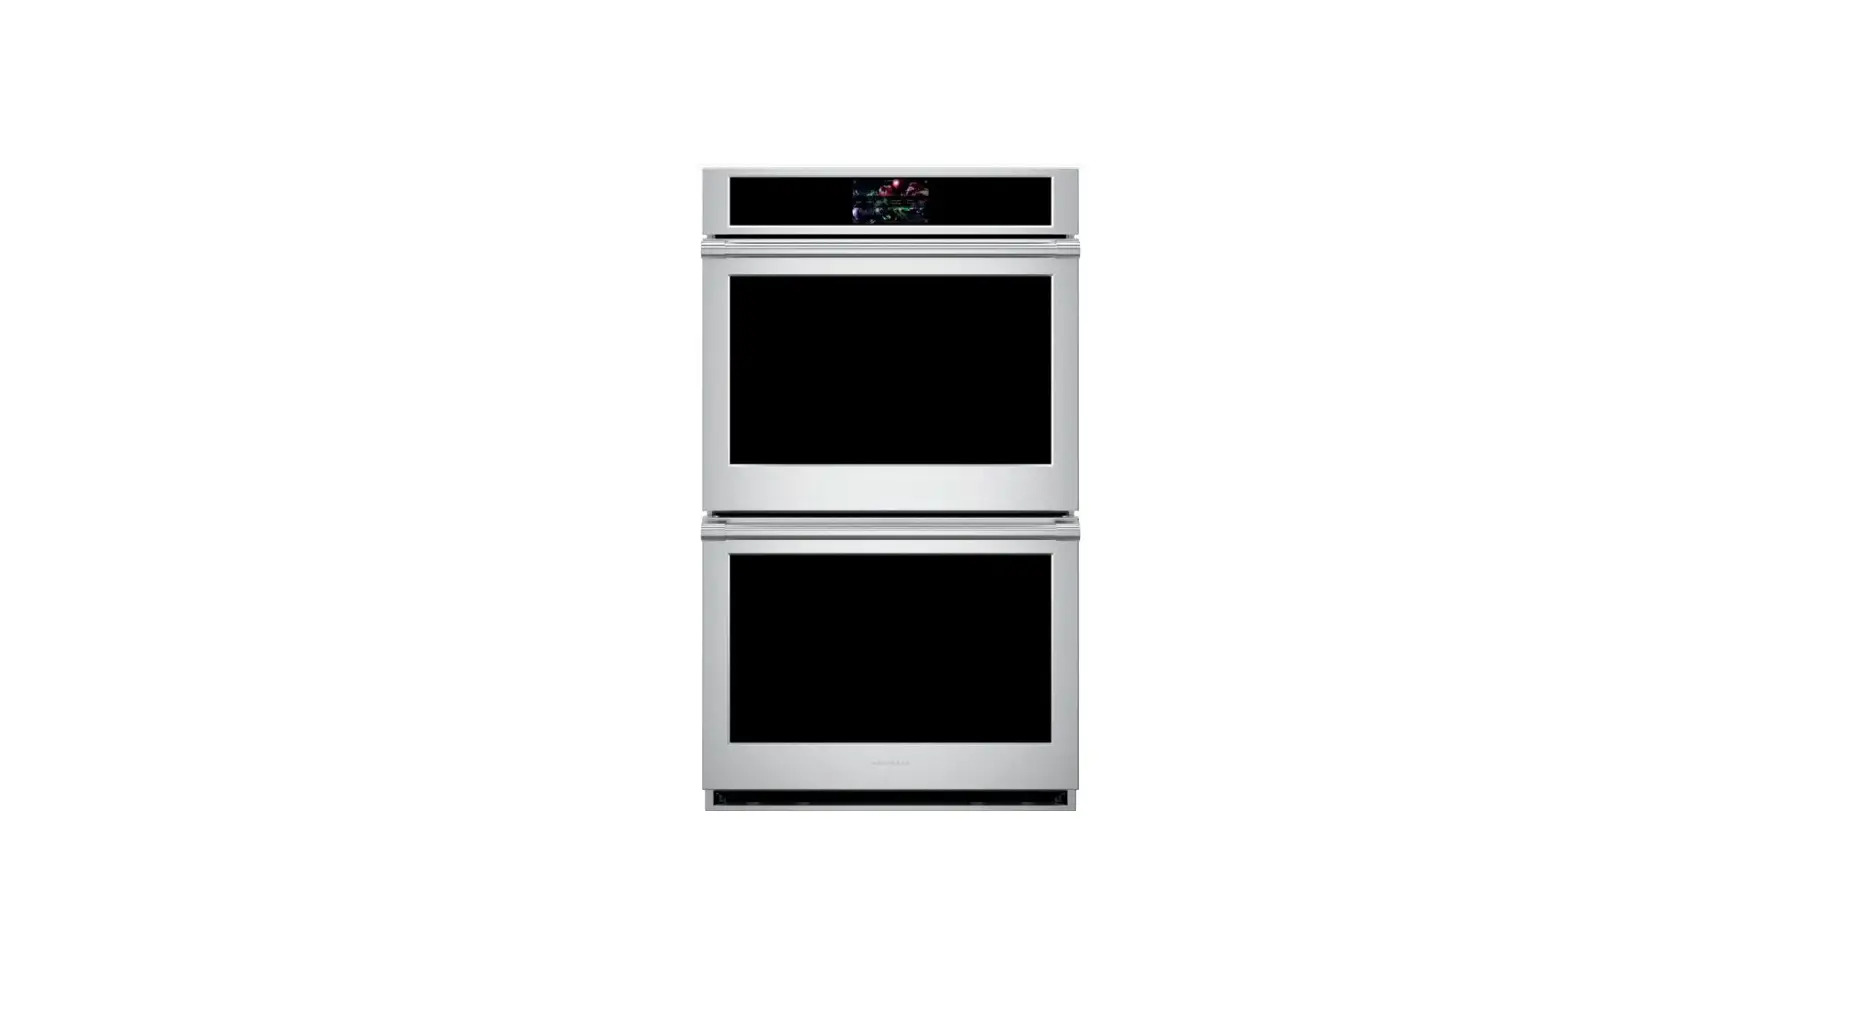 ZTD90DPSNSS Statement Series Smart Electric Double Wall Oven